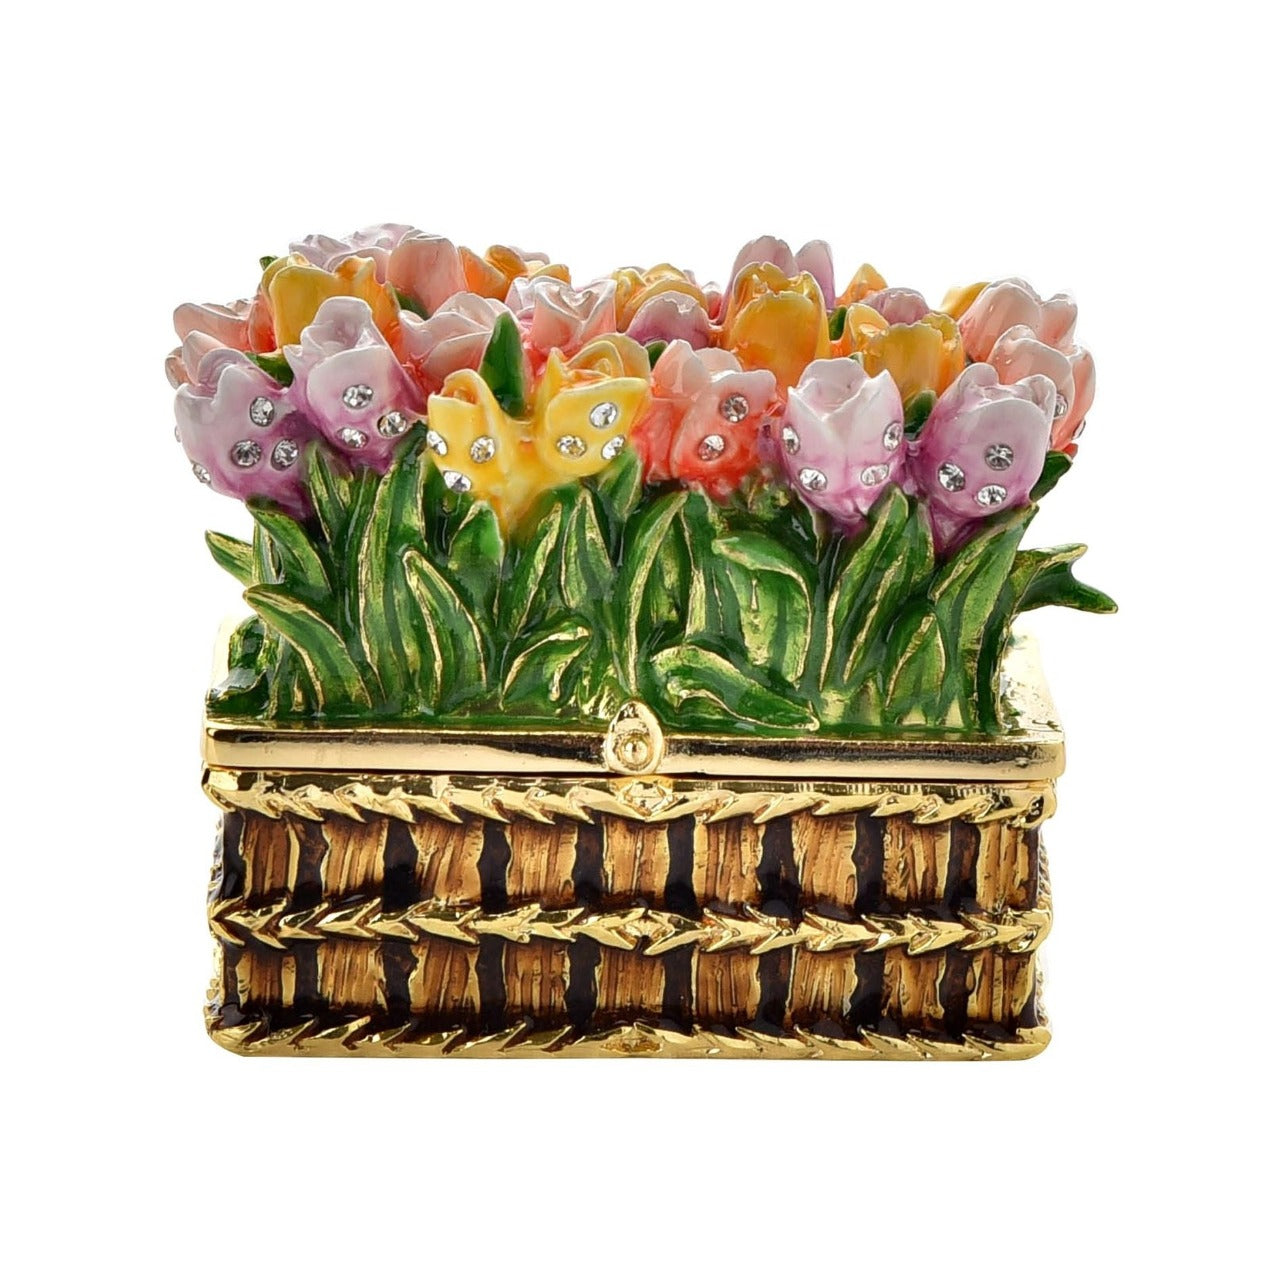 Treasured Trinkets - Flower Box  A flower box trinket box from Treasured Trinkets by STRATTON.  The wondrous trinket box makes a true statement piece for any bedroom, with flowery decoration which is truly in full bloom.